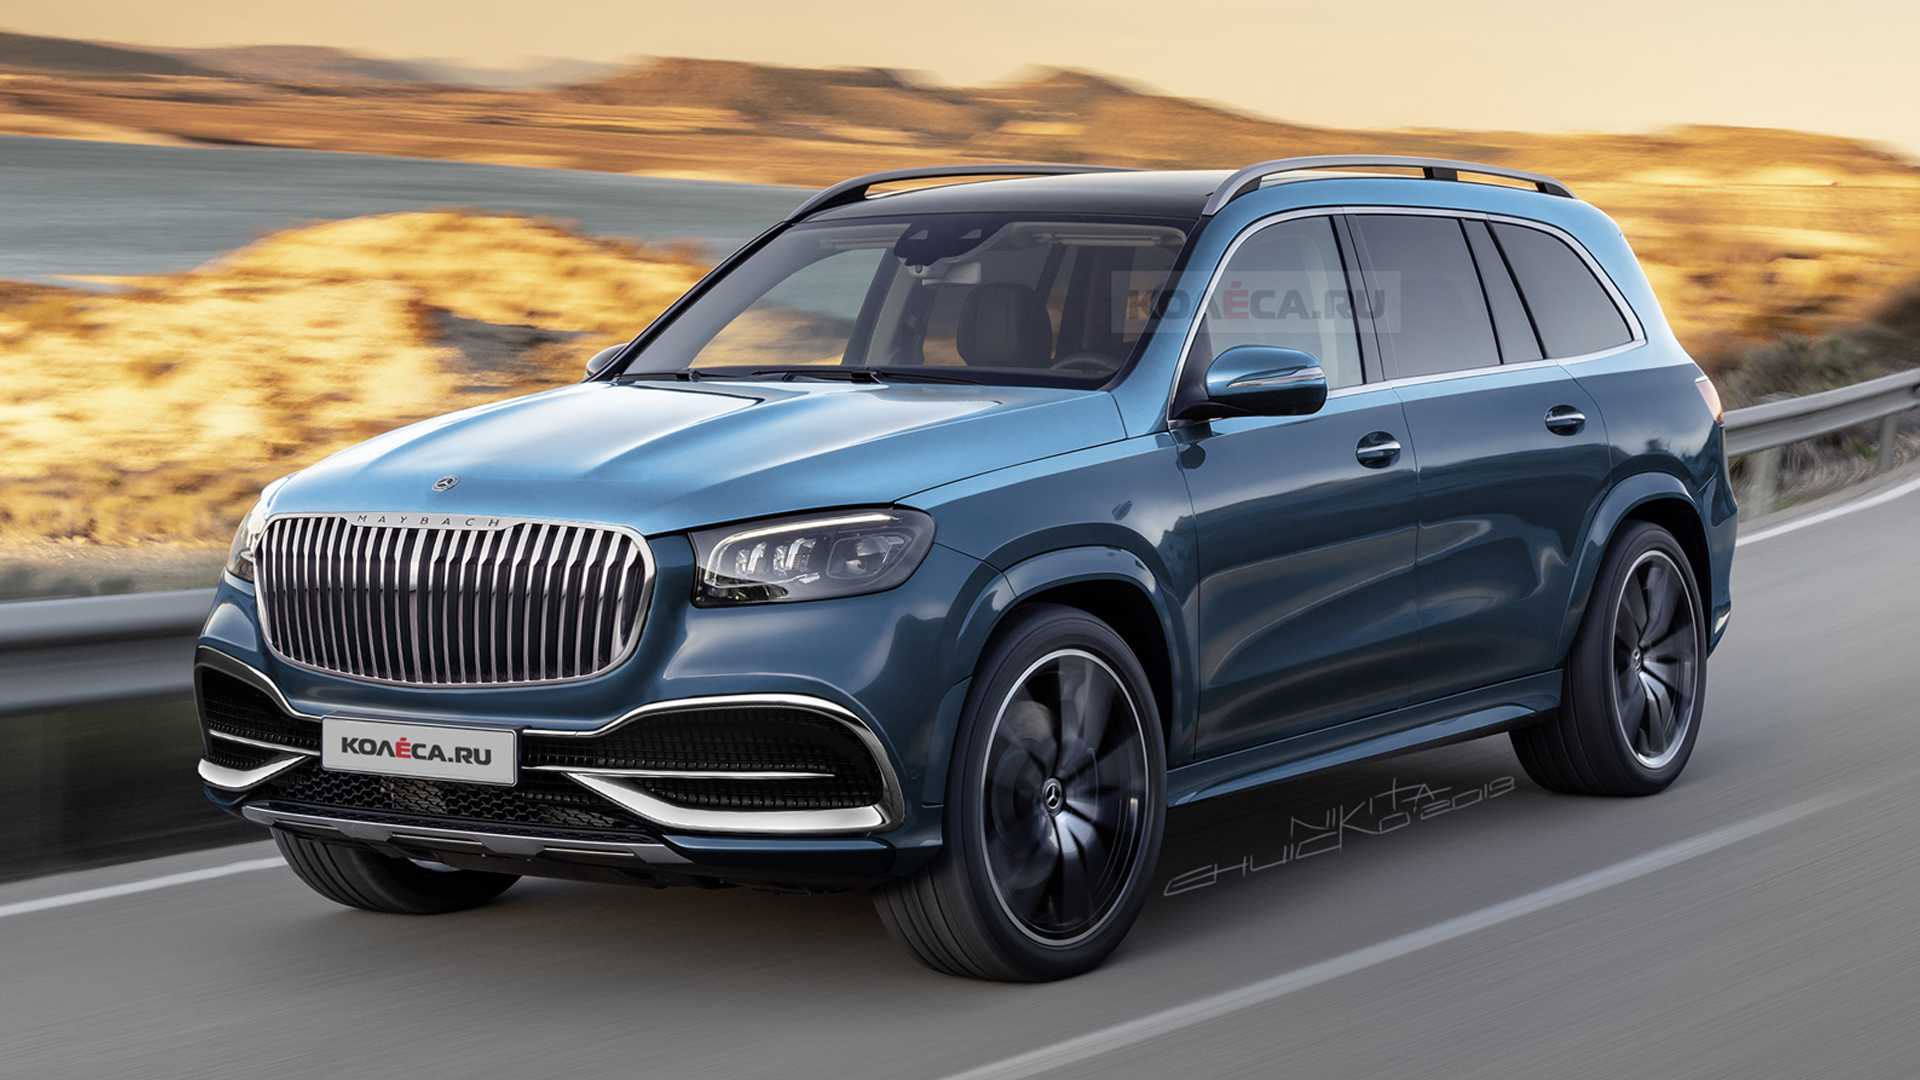 Mercedes Maybach GLS To Be Revealed Later This Year, V12 Rumored